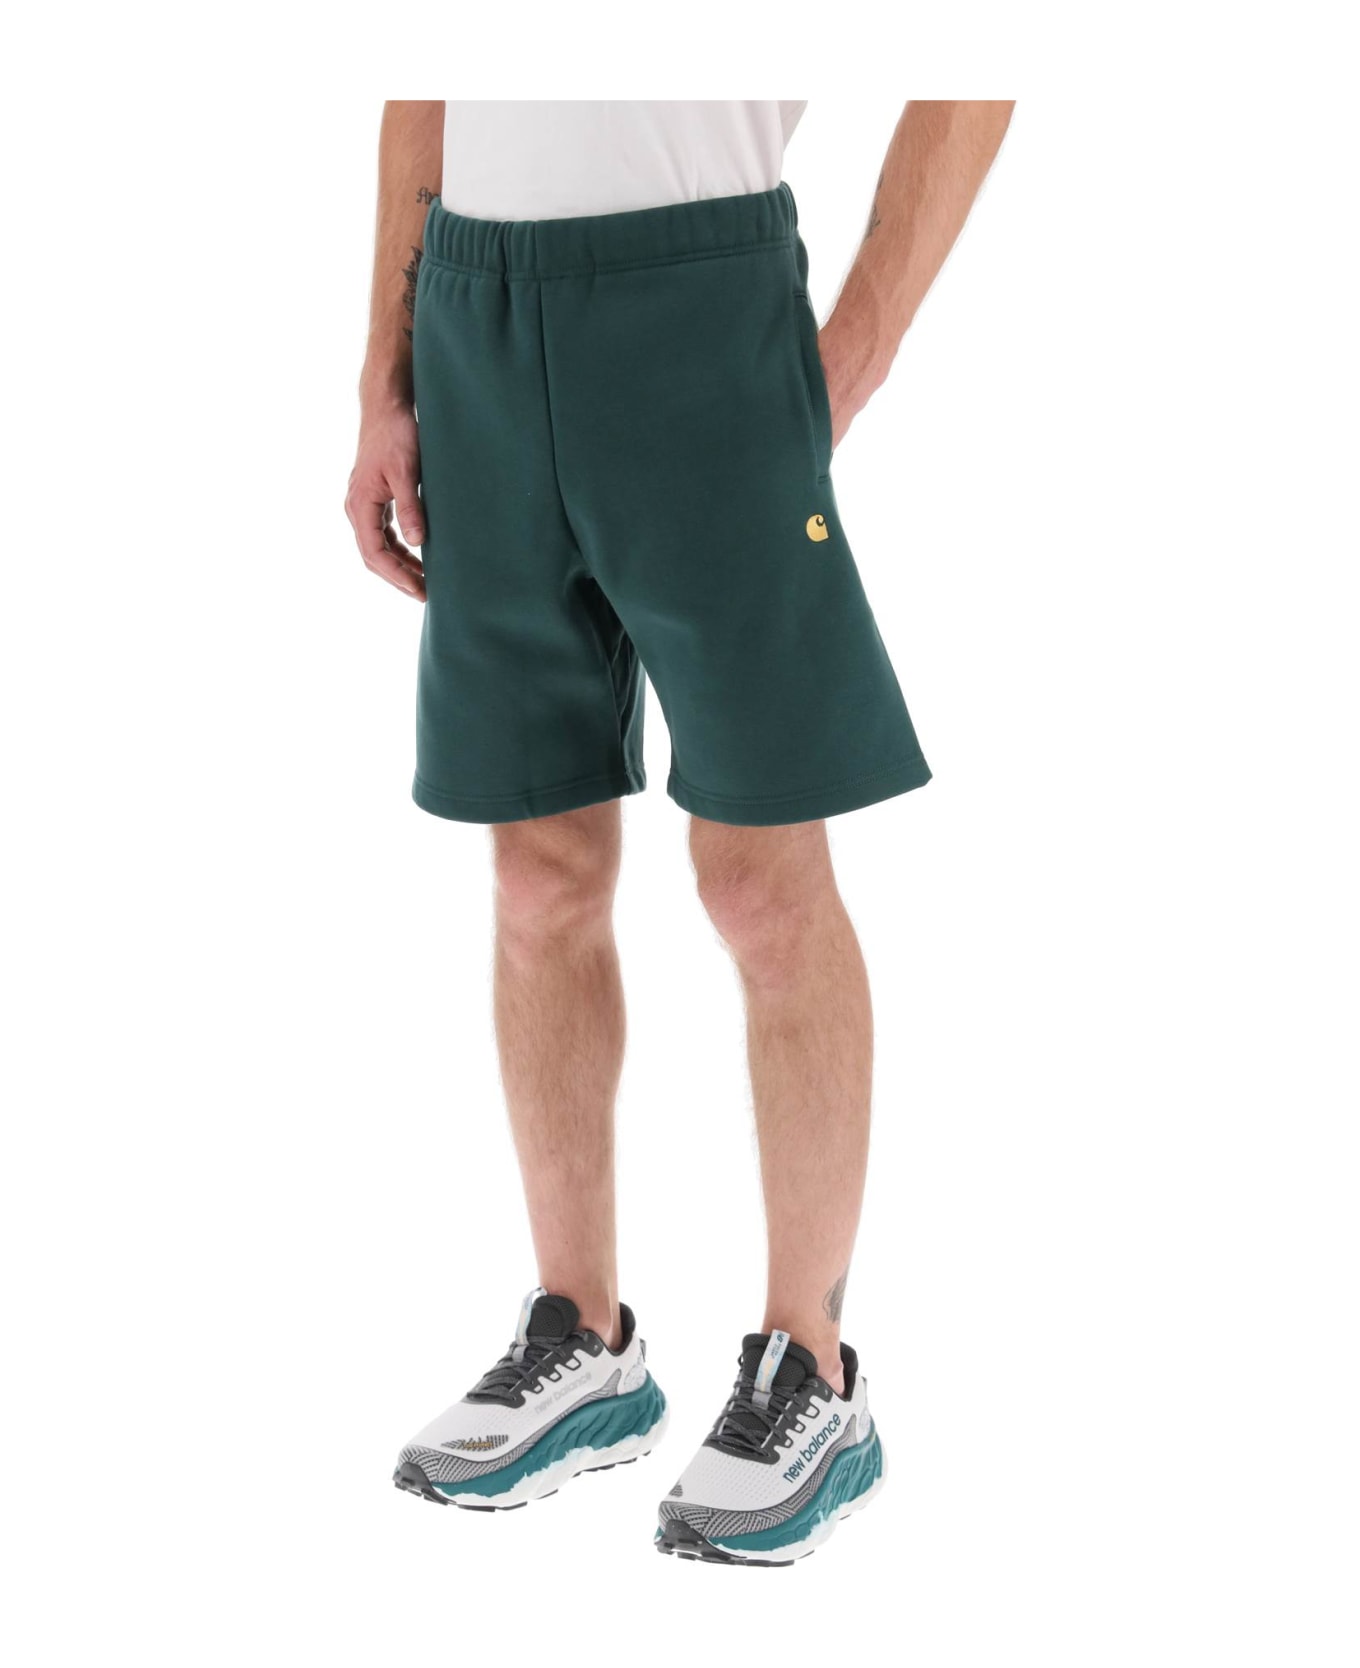 Carhartt Chase Sweat Shorts - DISCOVERY GREEN GOLD (Green)